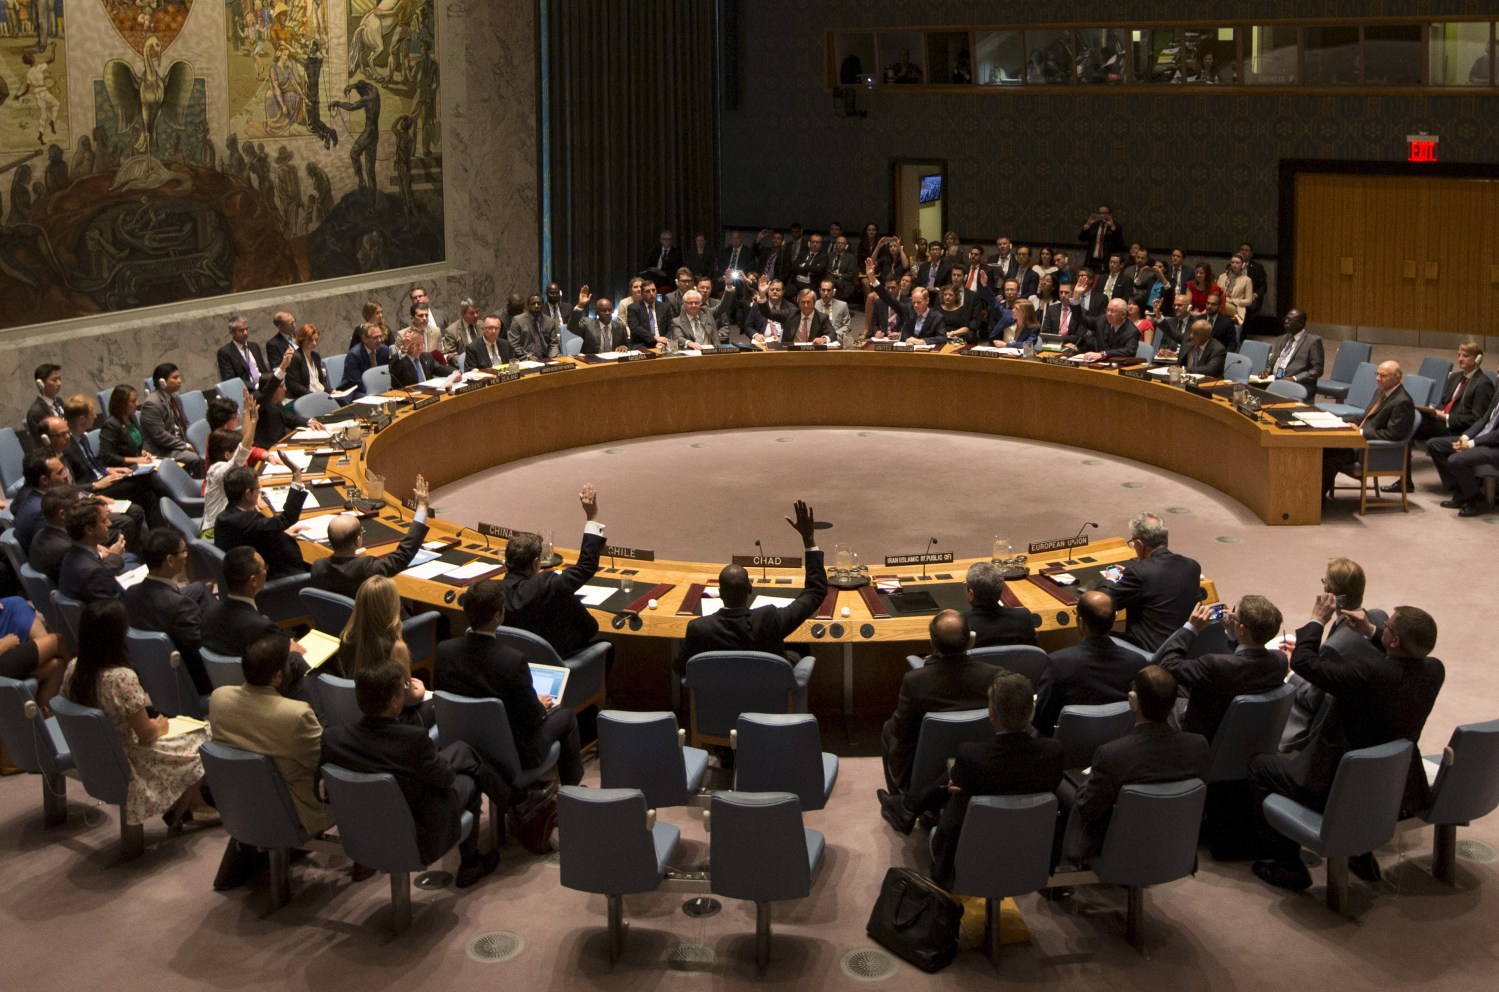 The United Nations Security Council votes to approve a resolution at the U.N. headquarters in New York July 20, 2015. The United Nations Security Council on Monday endorsed a deal to curb Iran's nuclear program in return for sanctions relief, but it will be able to re-impose U.N. penalties during the next decade if Tehran breaches the historic agreement.   REUTERS/Mike Segar - GF10000164772